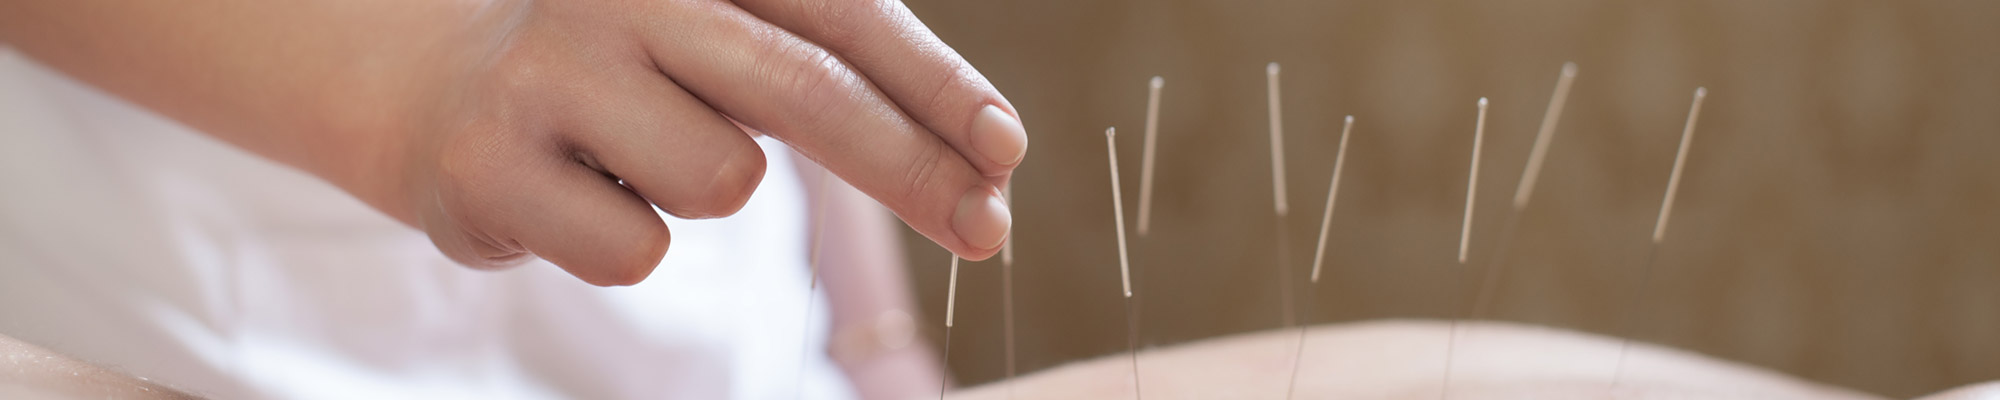 acupuncturist placing needles in patients back